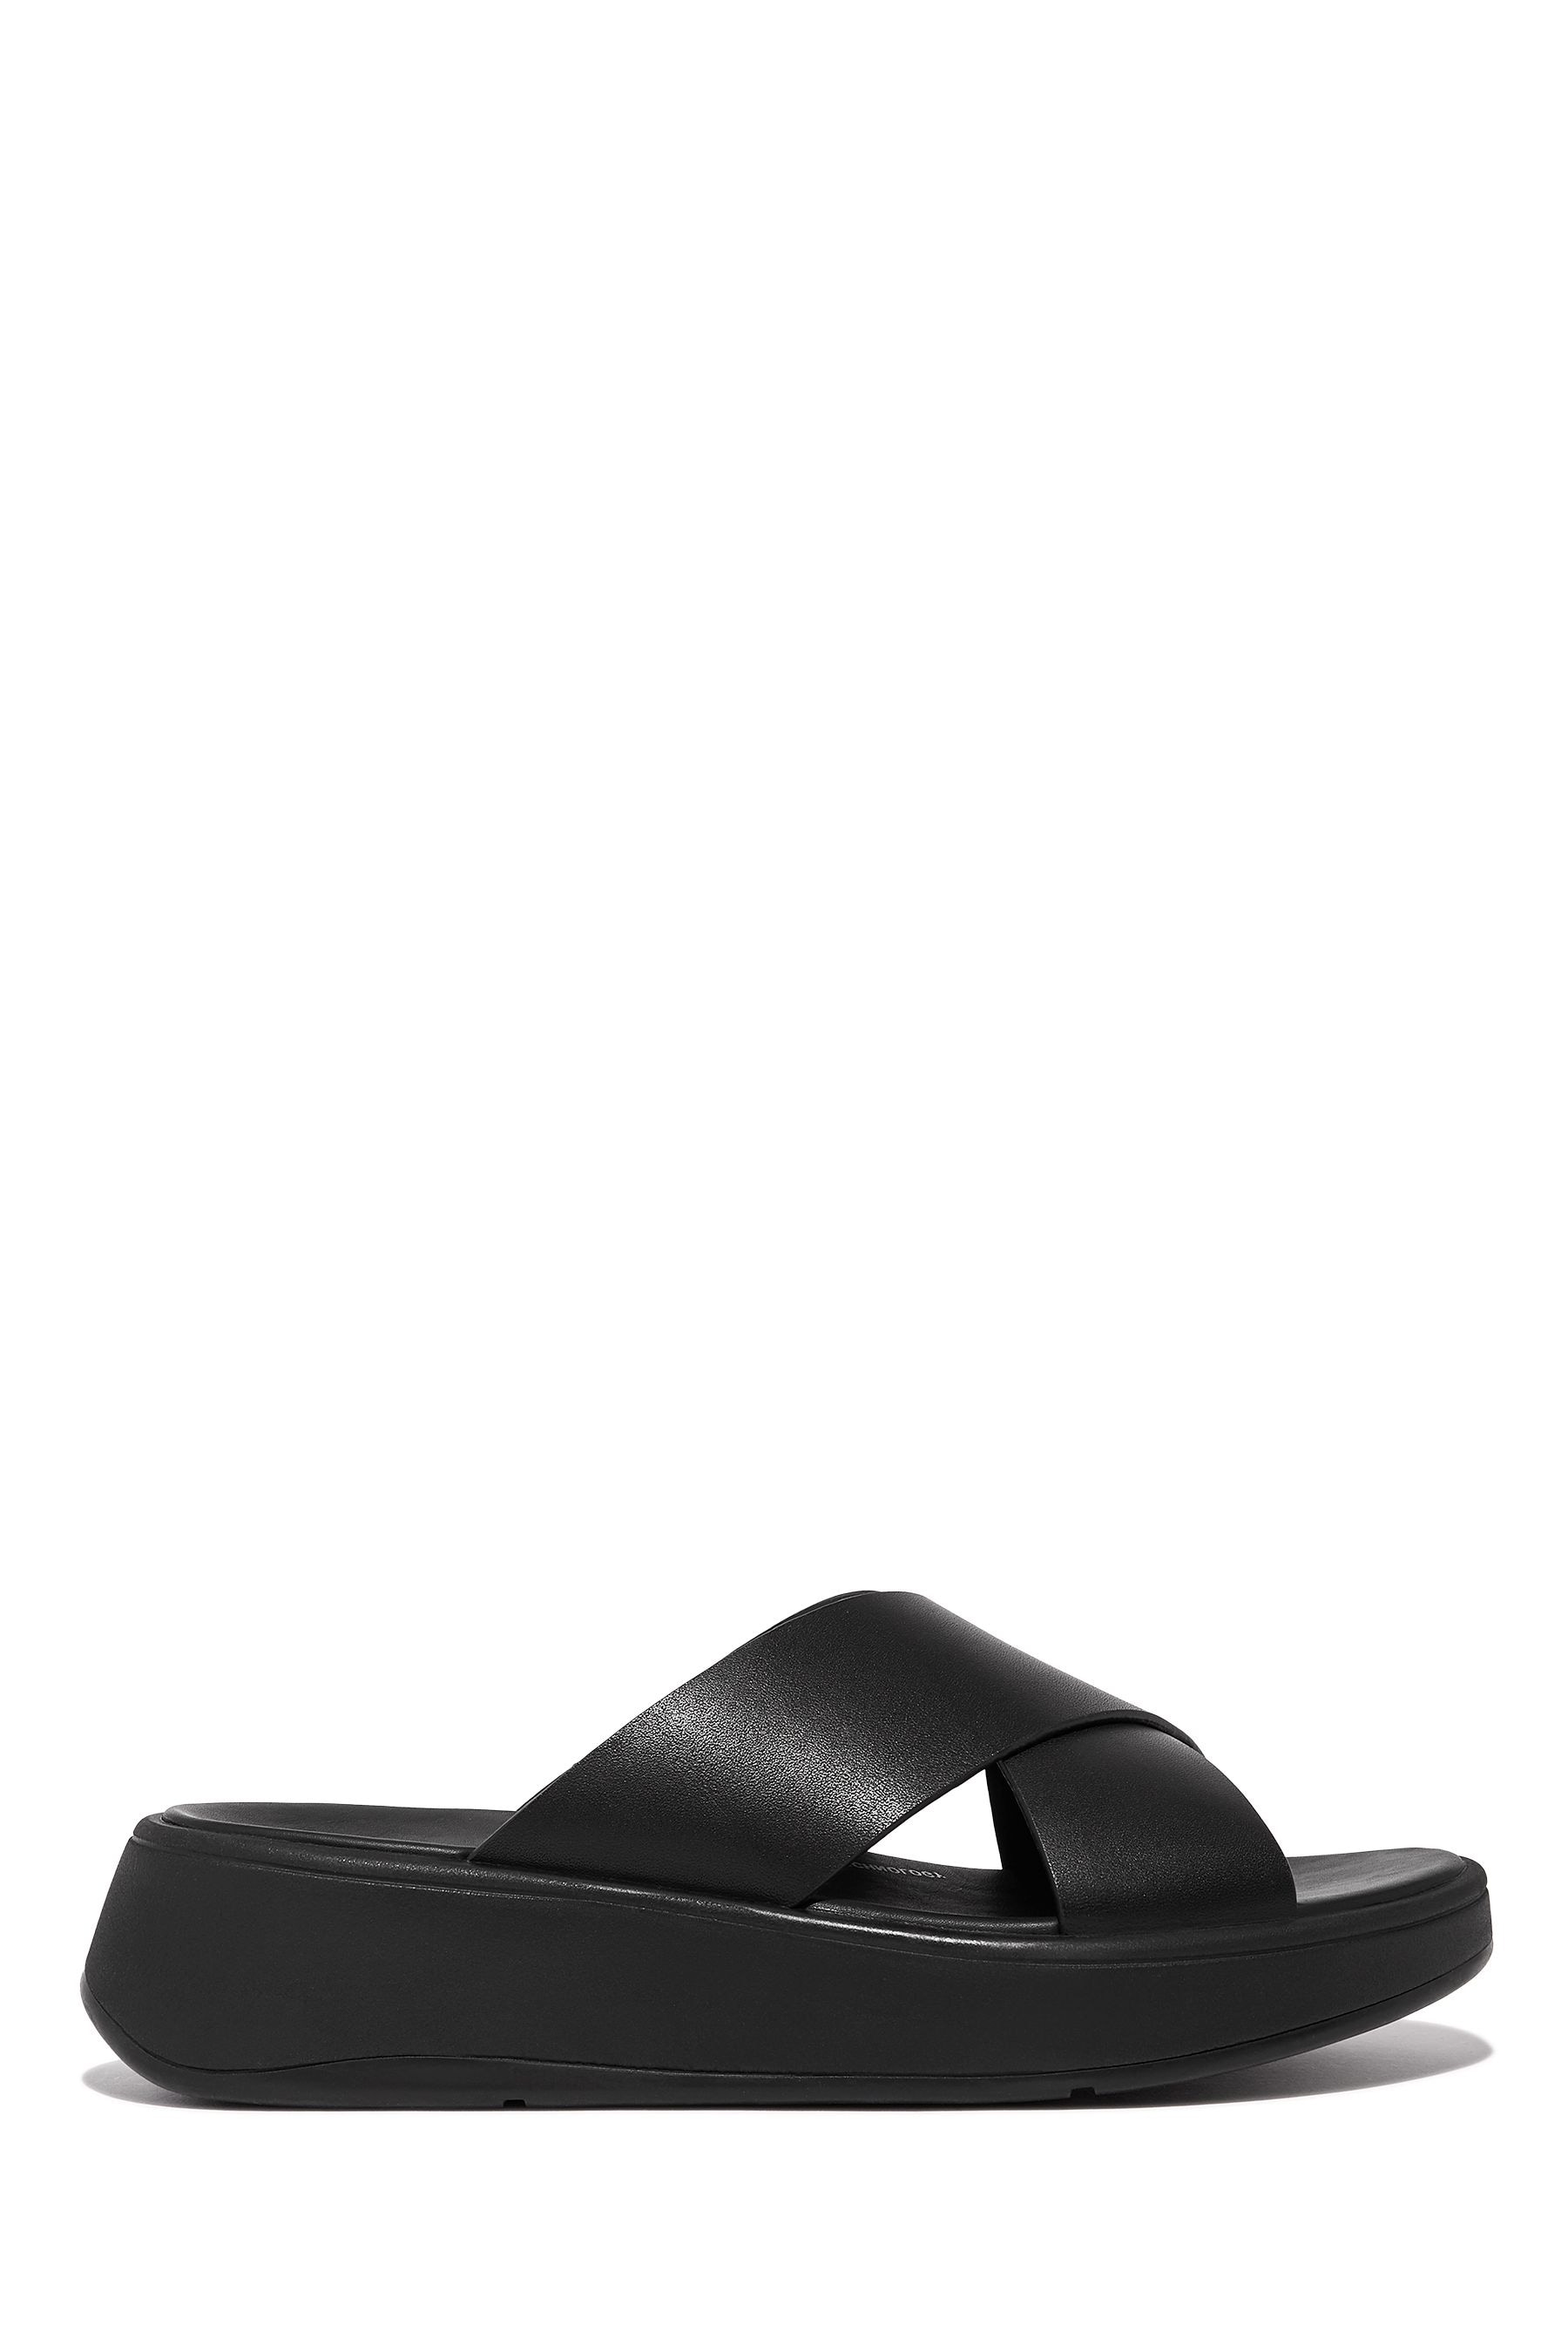 Buy FitFlop F-Mode Leather Flatform Black Cross Slides from the Next UK ...